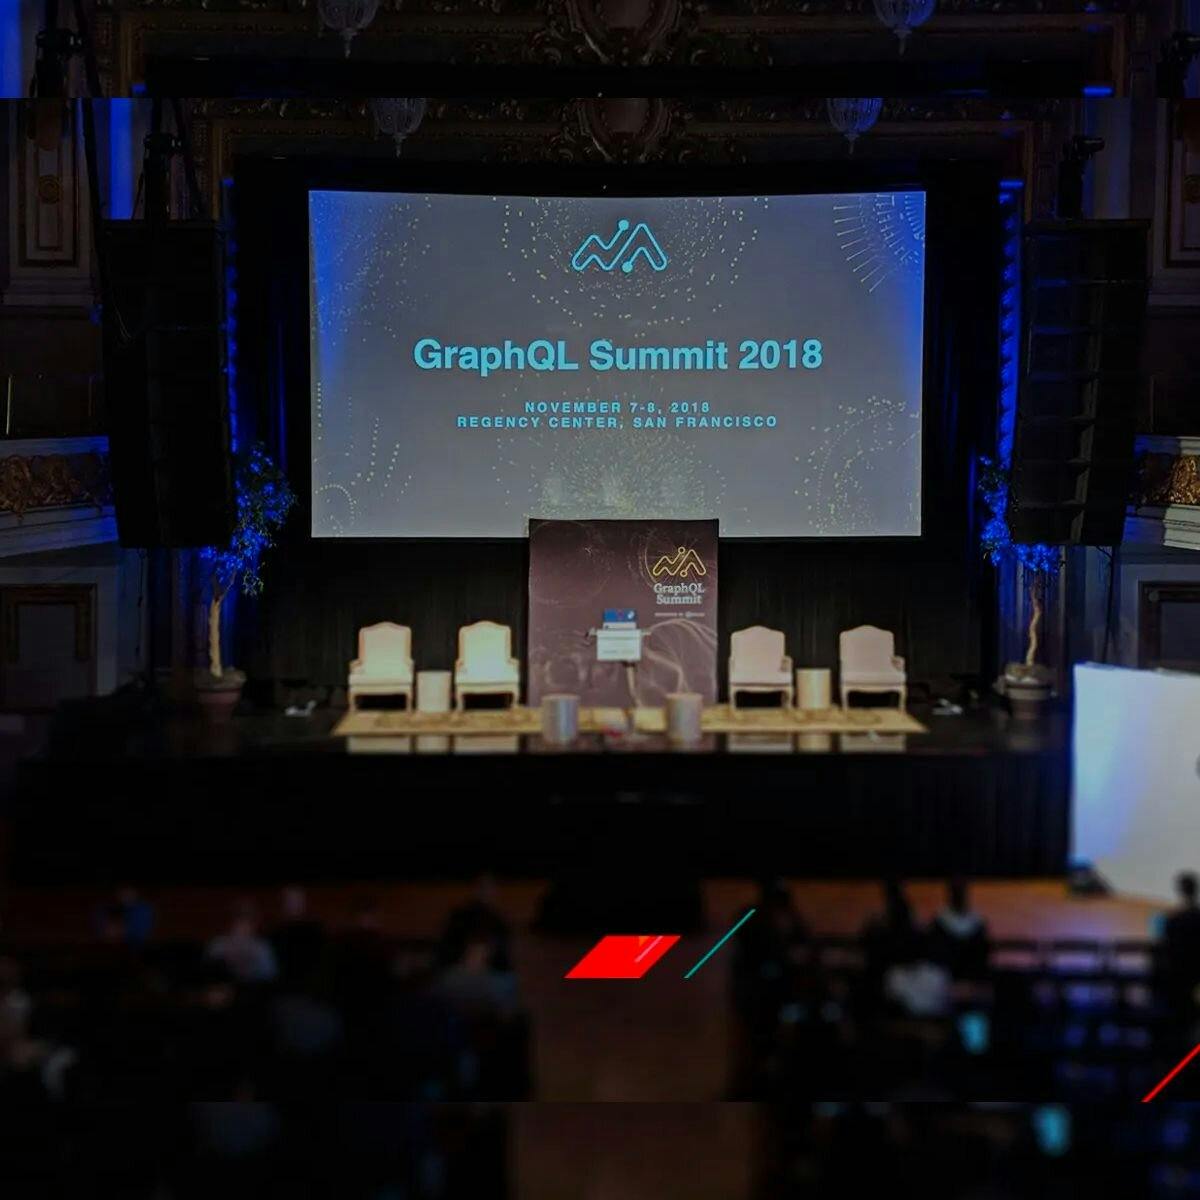 Highlights from the GraphQL Summit 2018 in San Francisco